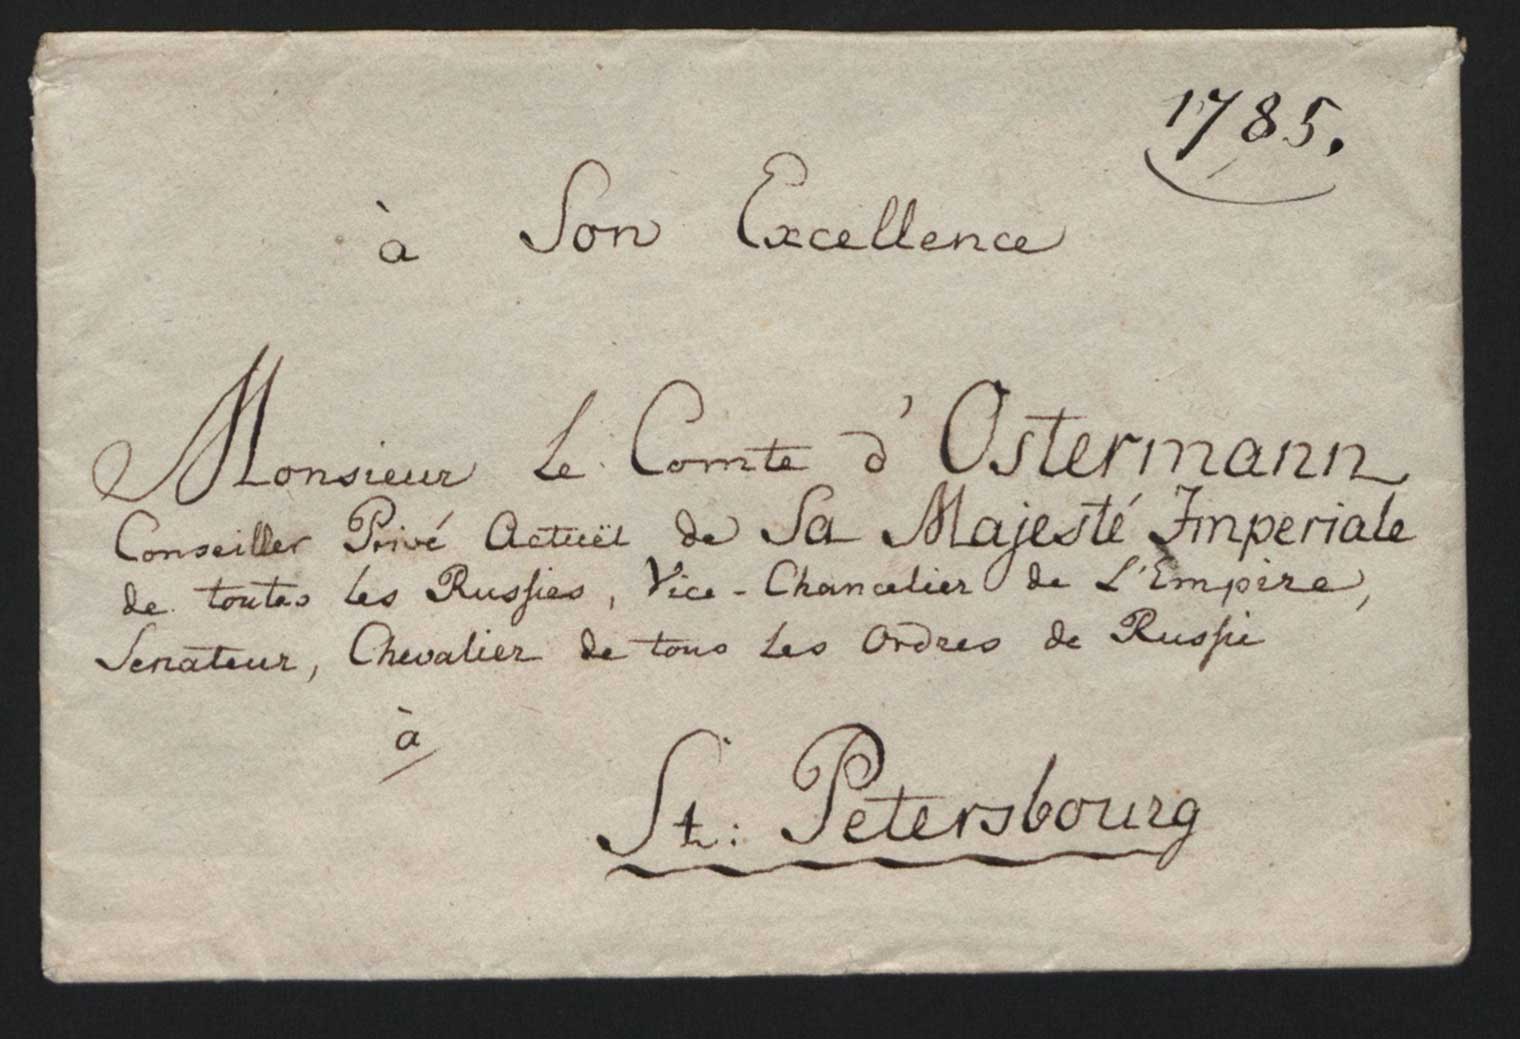 An envelope addressed by hand to Monsieur Le Comte d'Ostermann and dated 1785